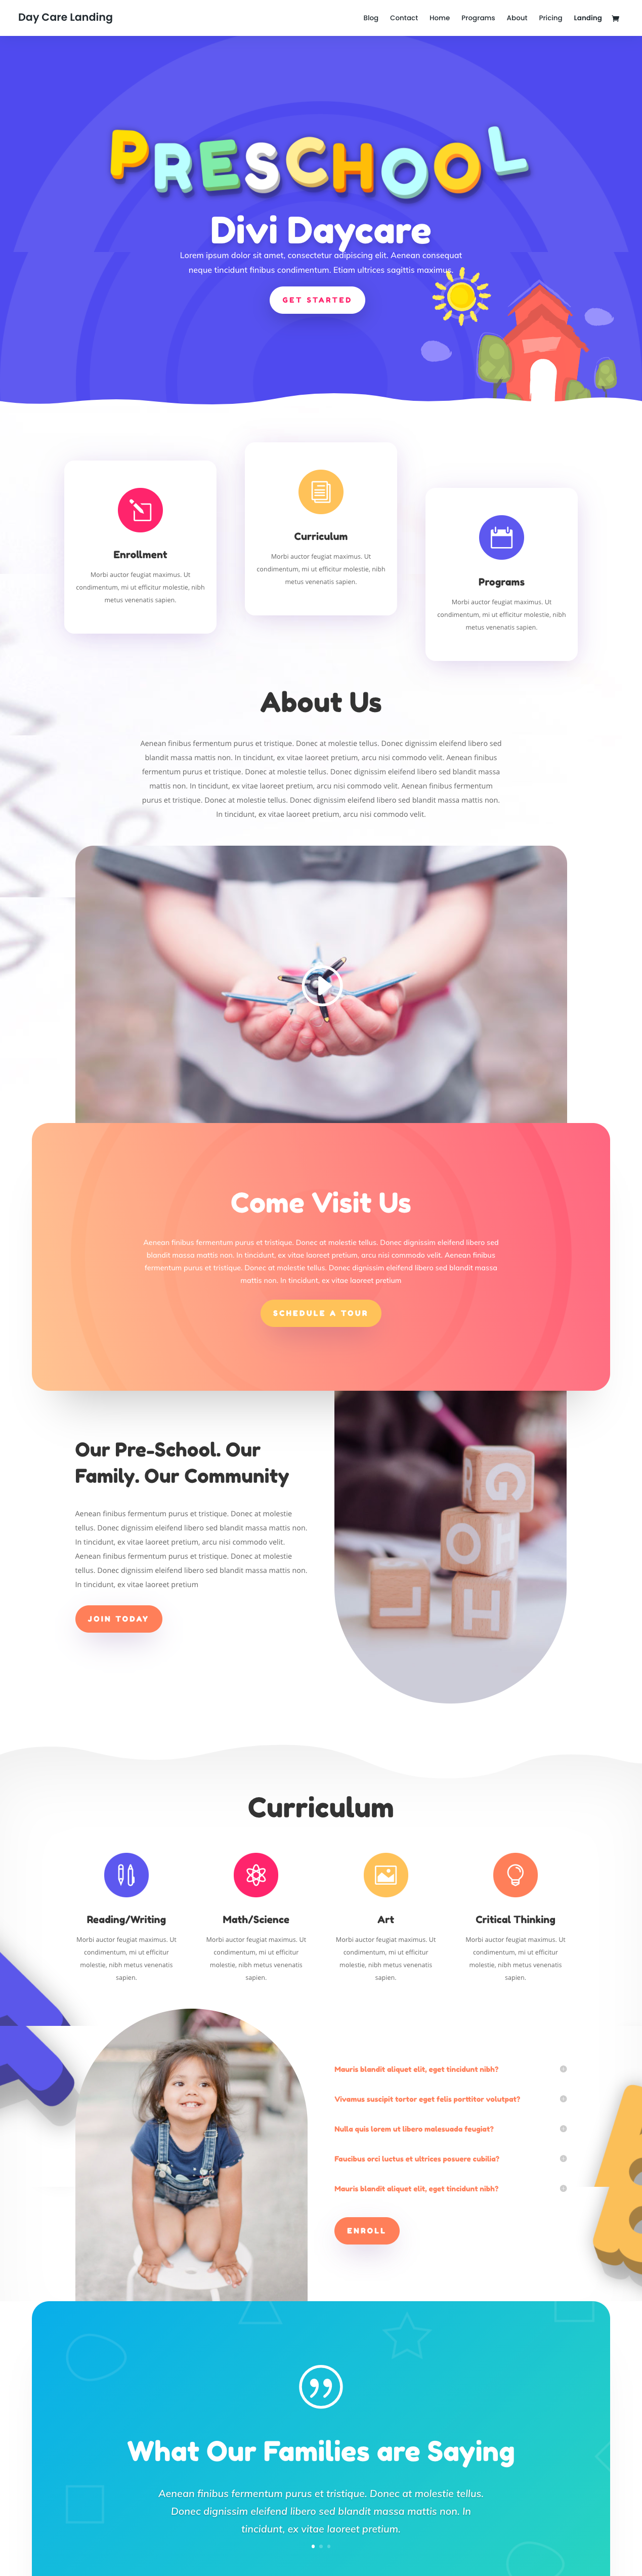 A layout for a template for a restaurant website